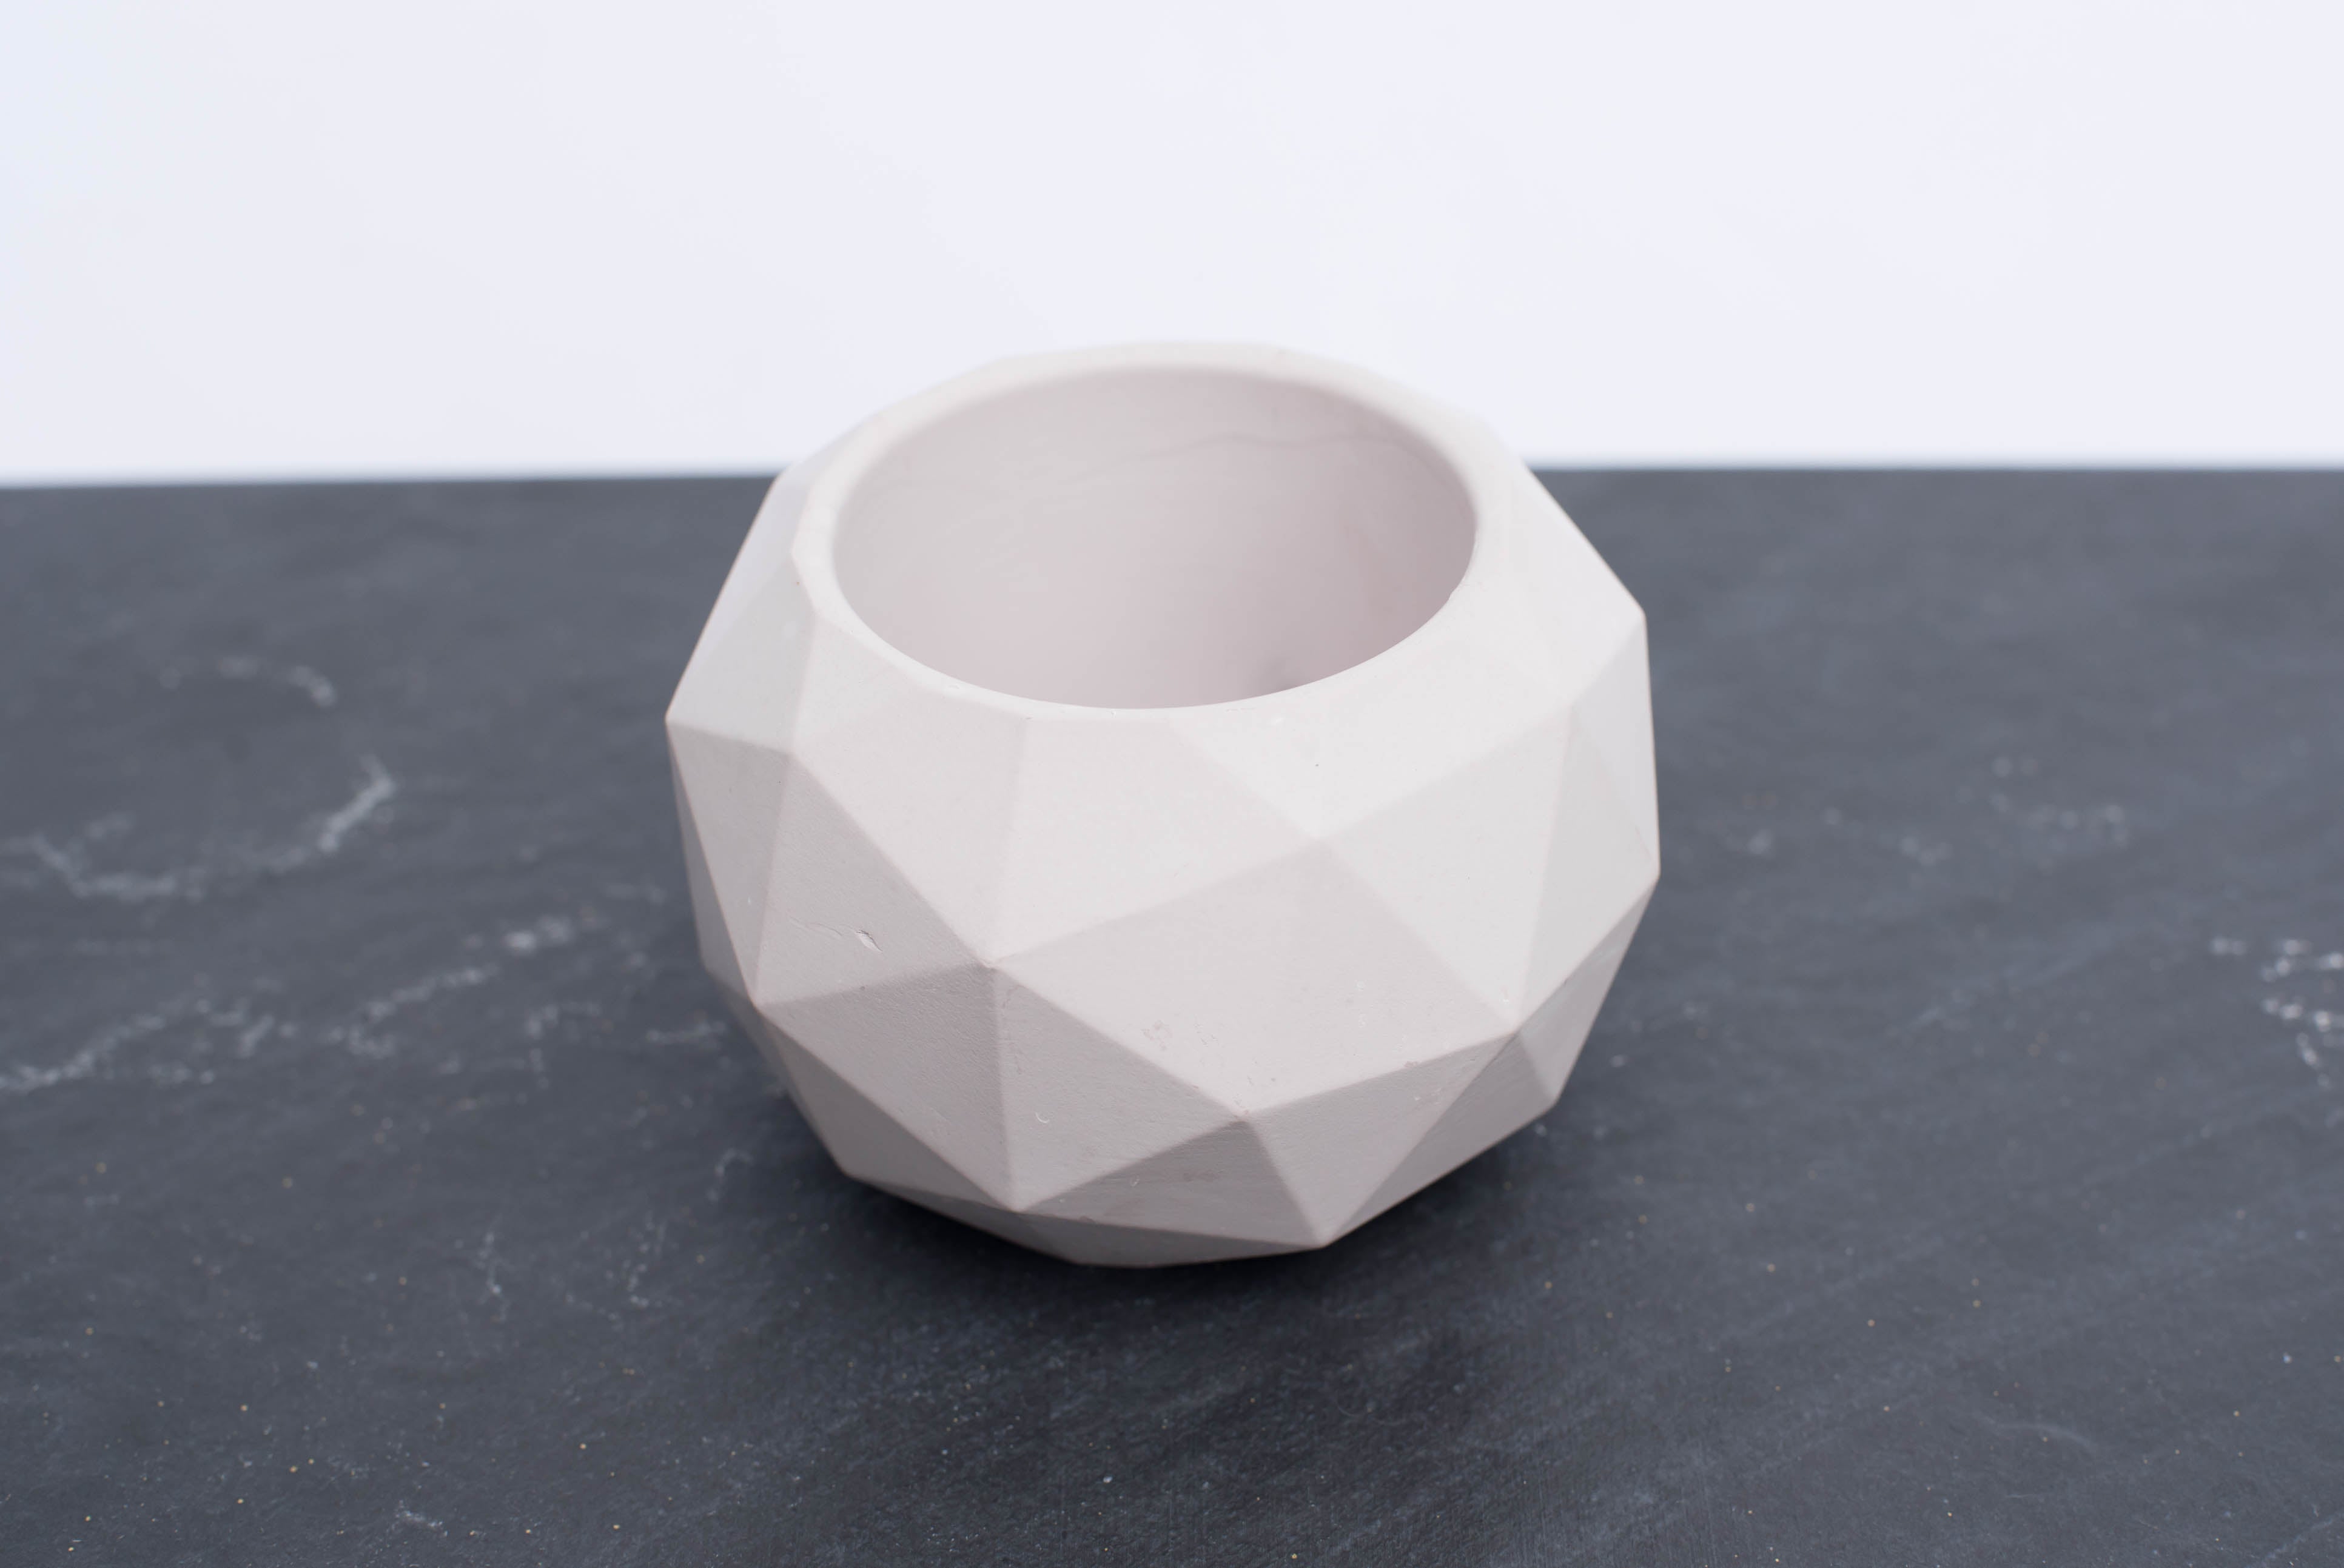 Small Geo Planter - made by kippen